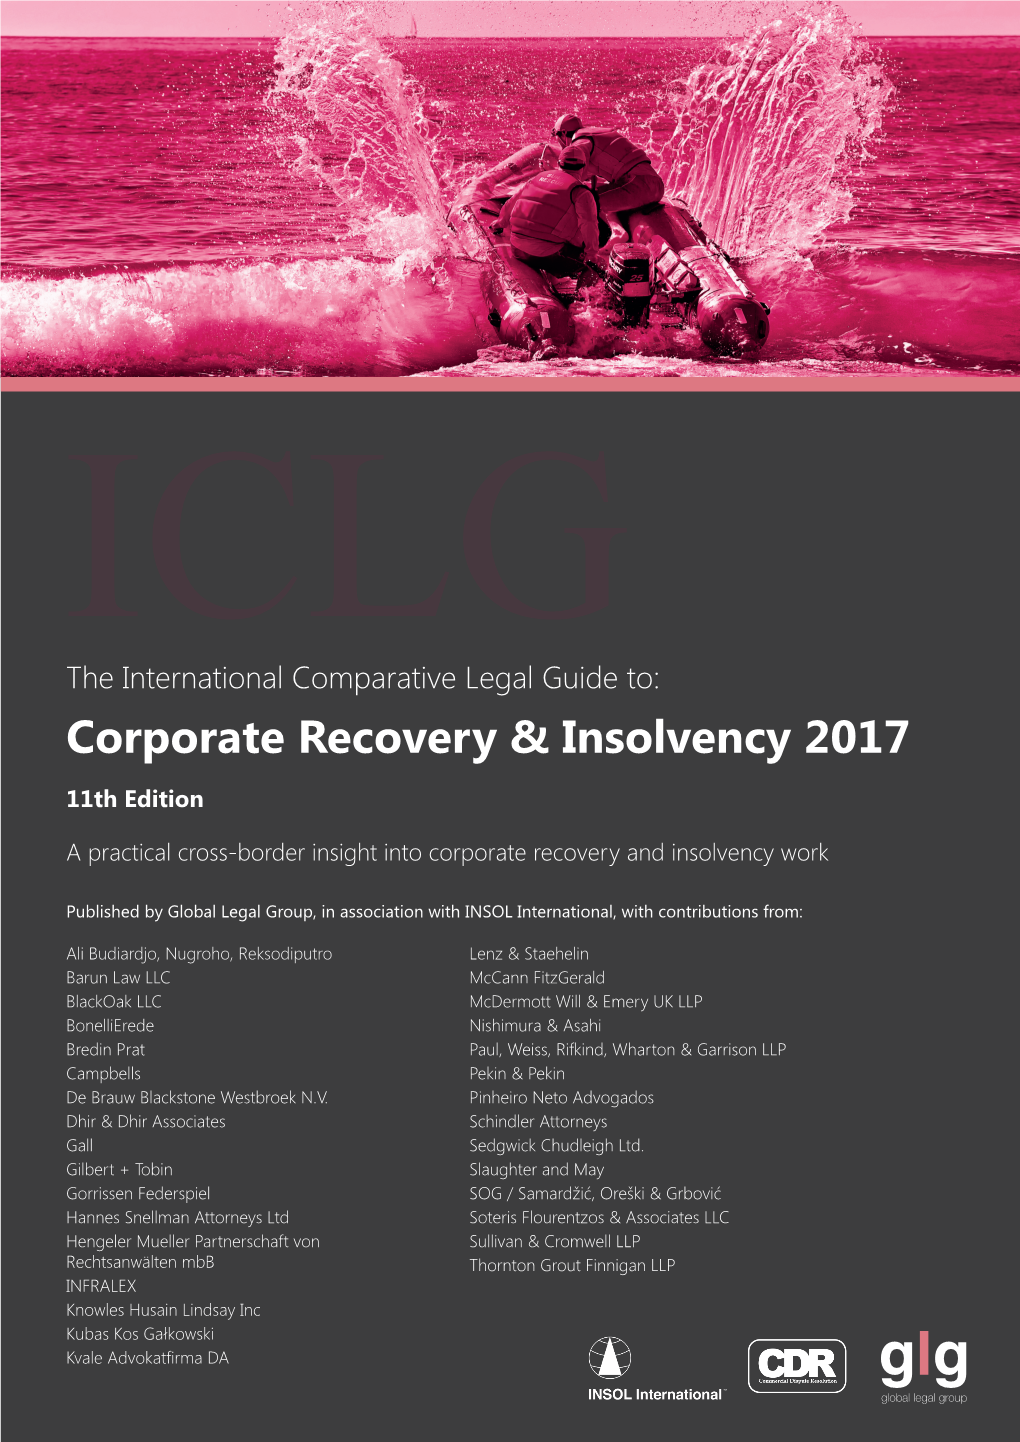 Corporate Recovery & Insolvency 2017